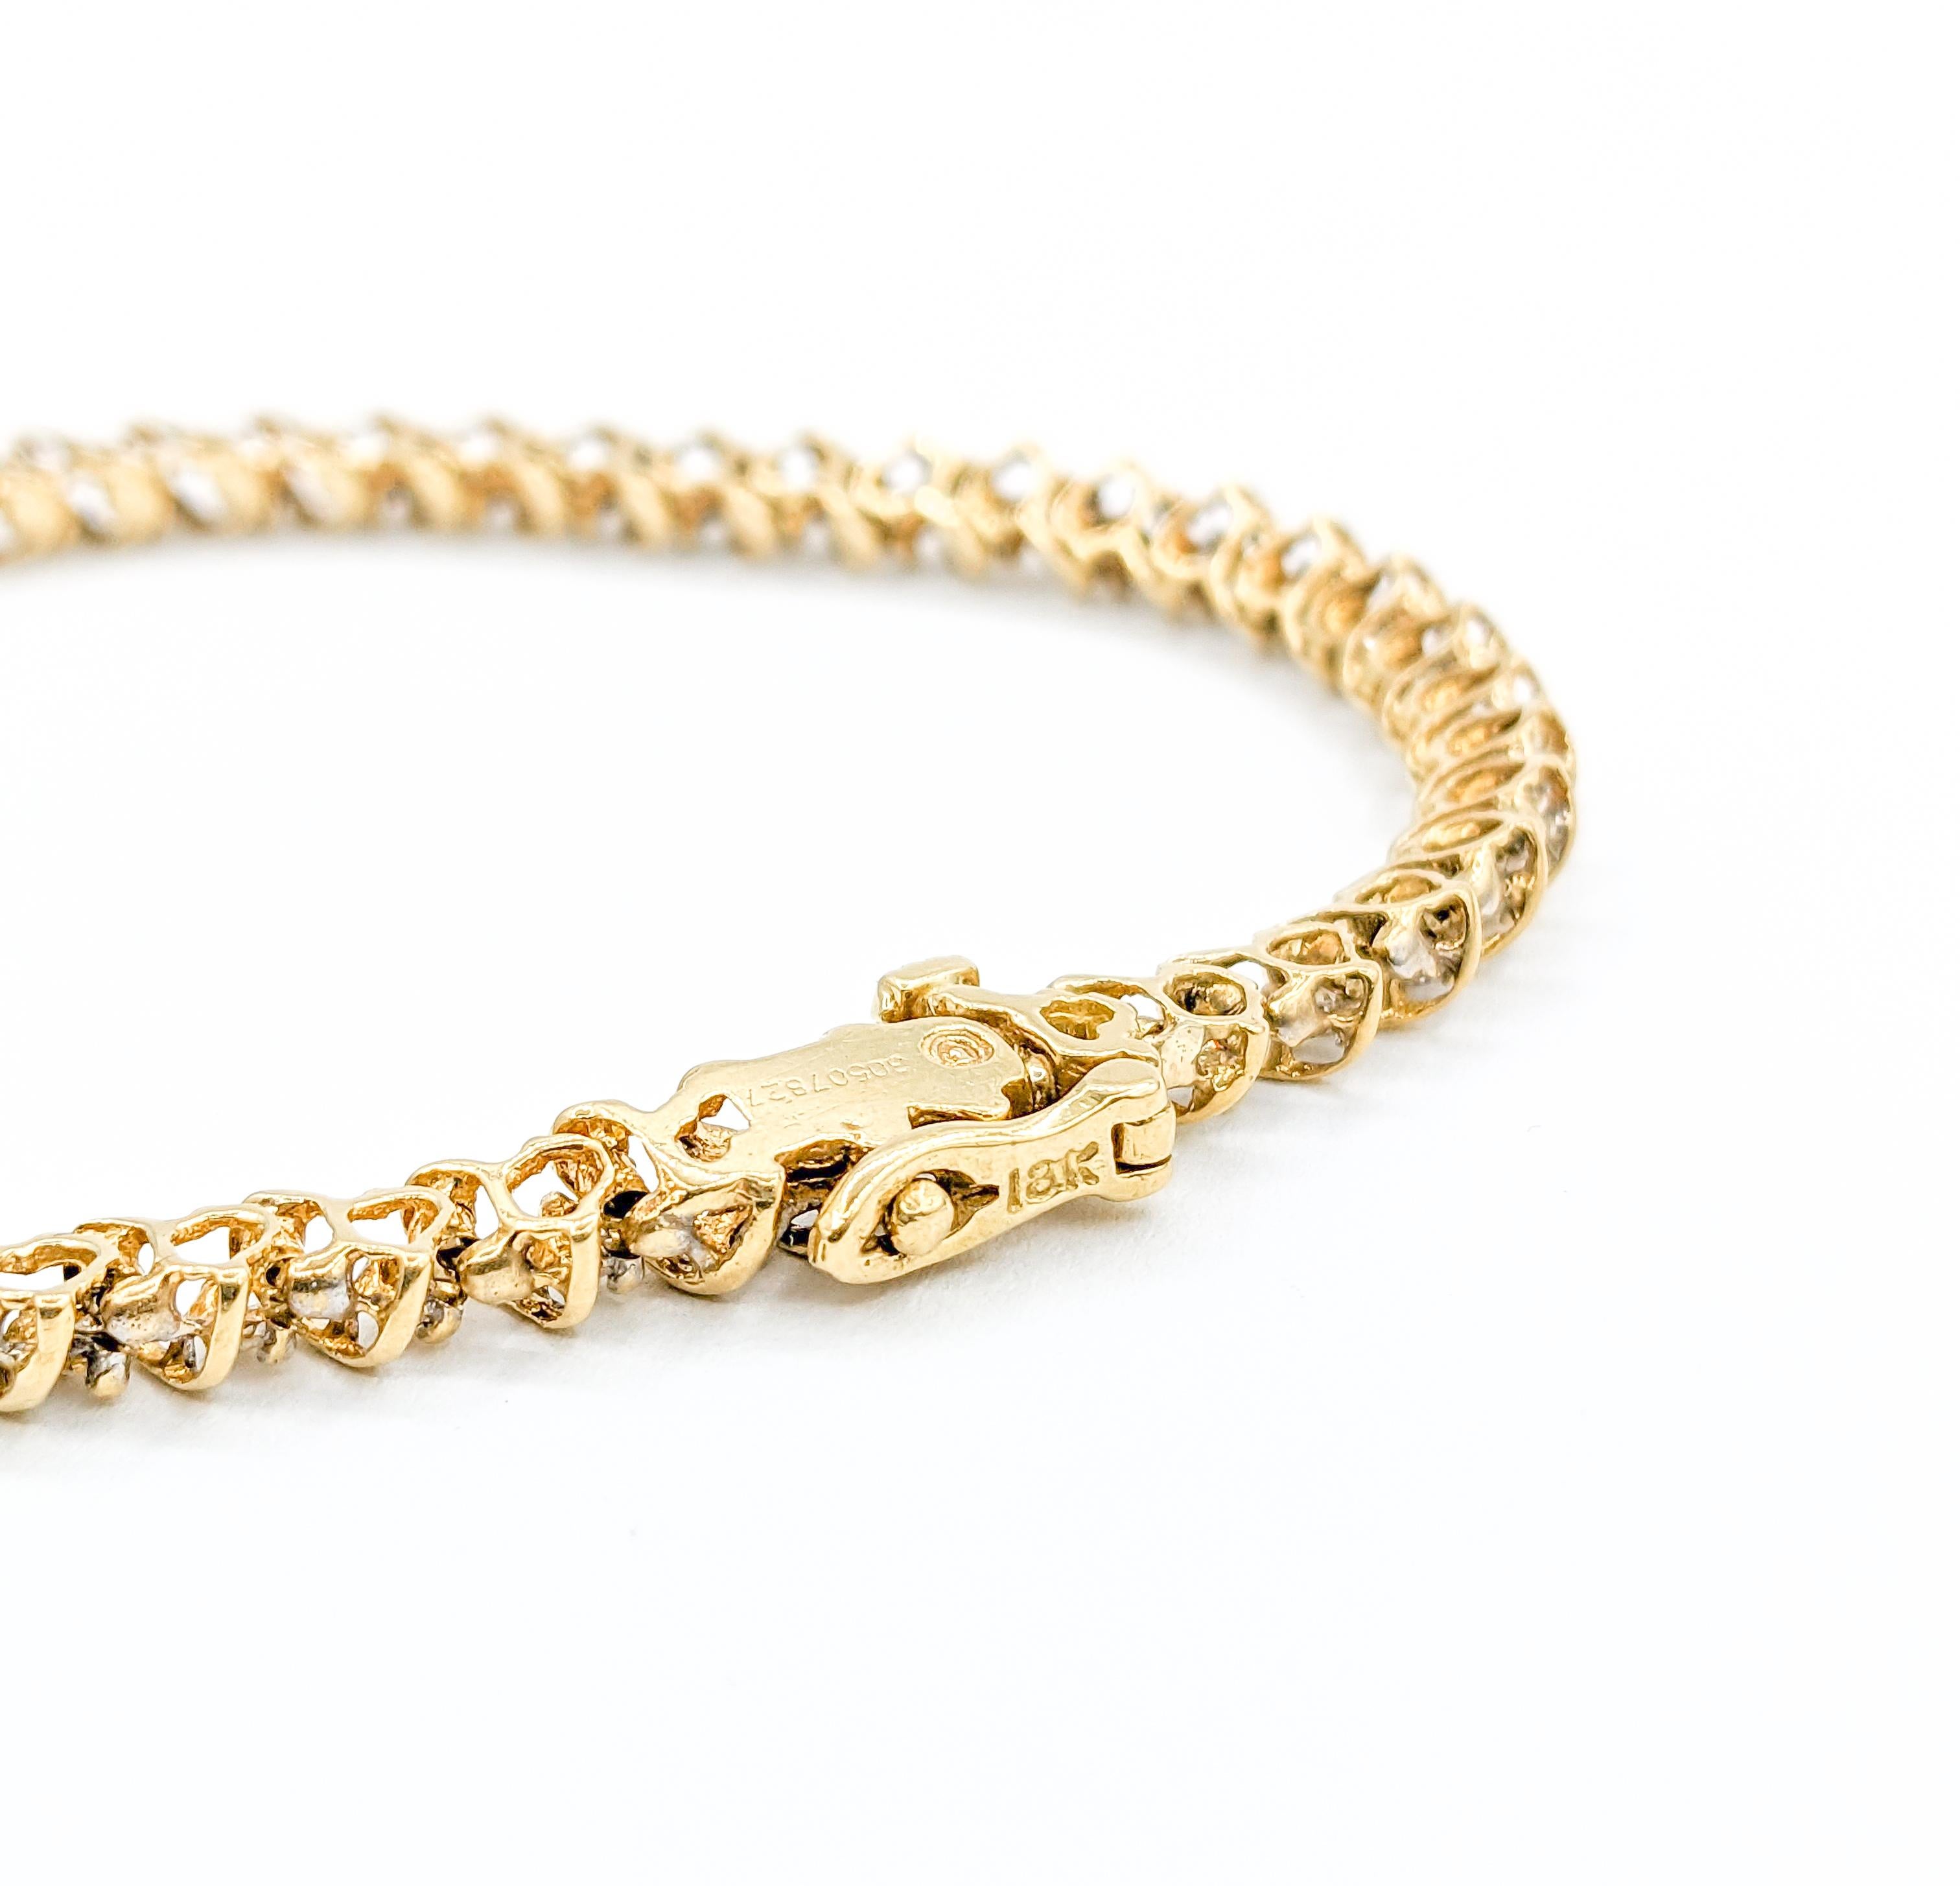 Vintage 1.50ctw Round Diamond Tennis Bracelet in Gold

Introducing an exquisite Vintage Diamond Tennis Bracelet, a timeless piece of elegance and sophistication. Crafted in lustrous 18K Yellow Gold, this bracelet showcases 1.50ctw of glittering